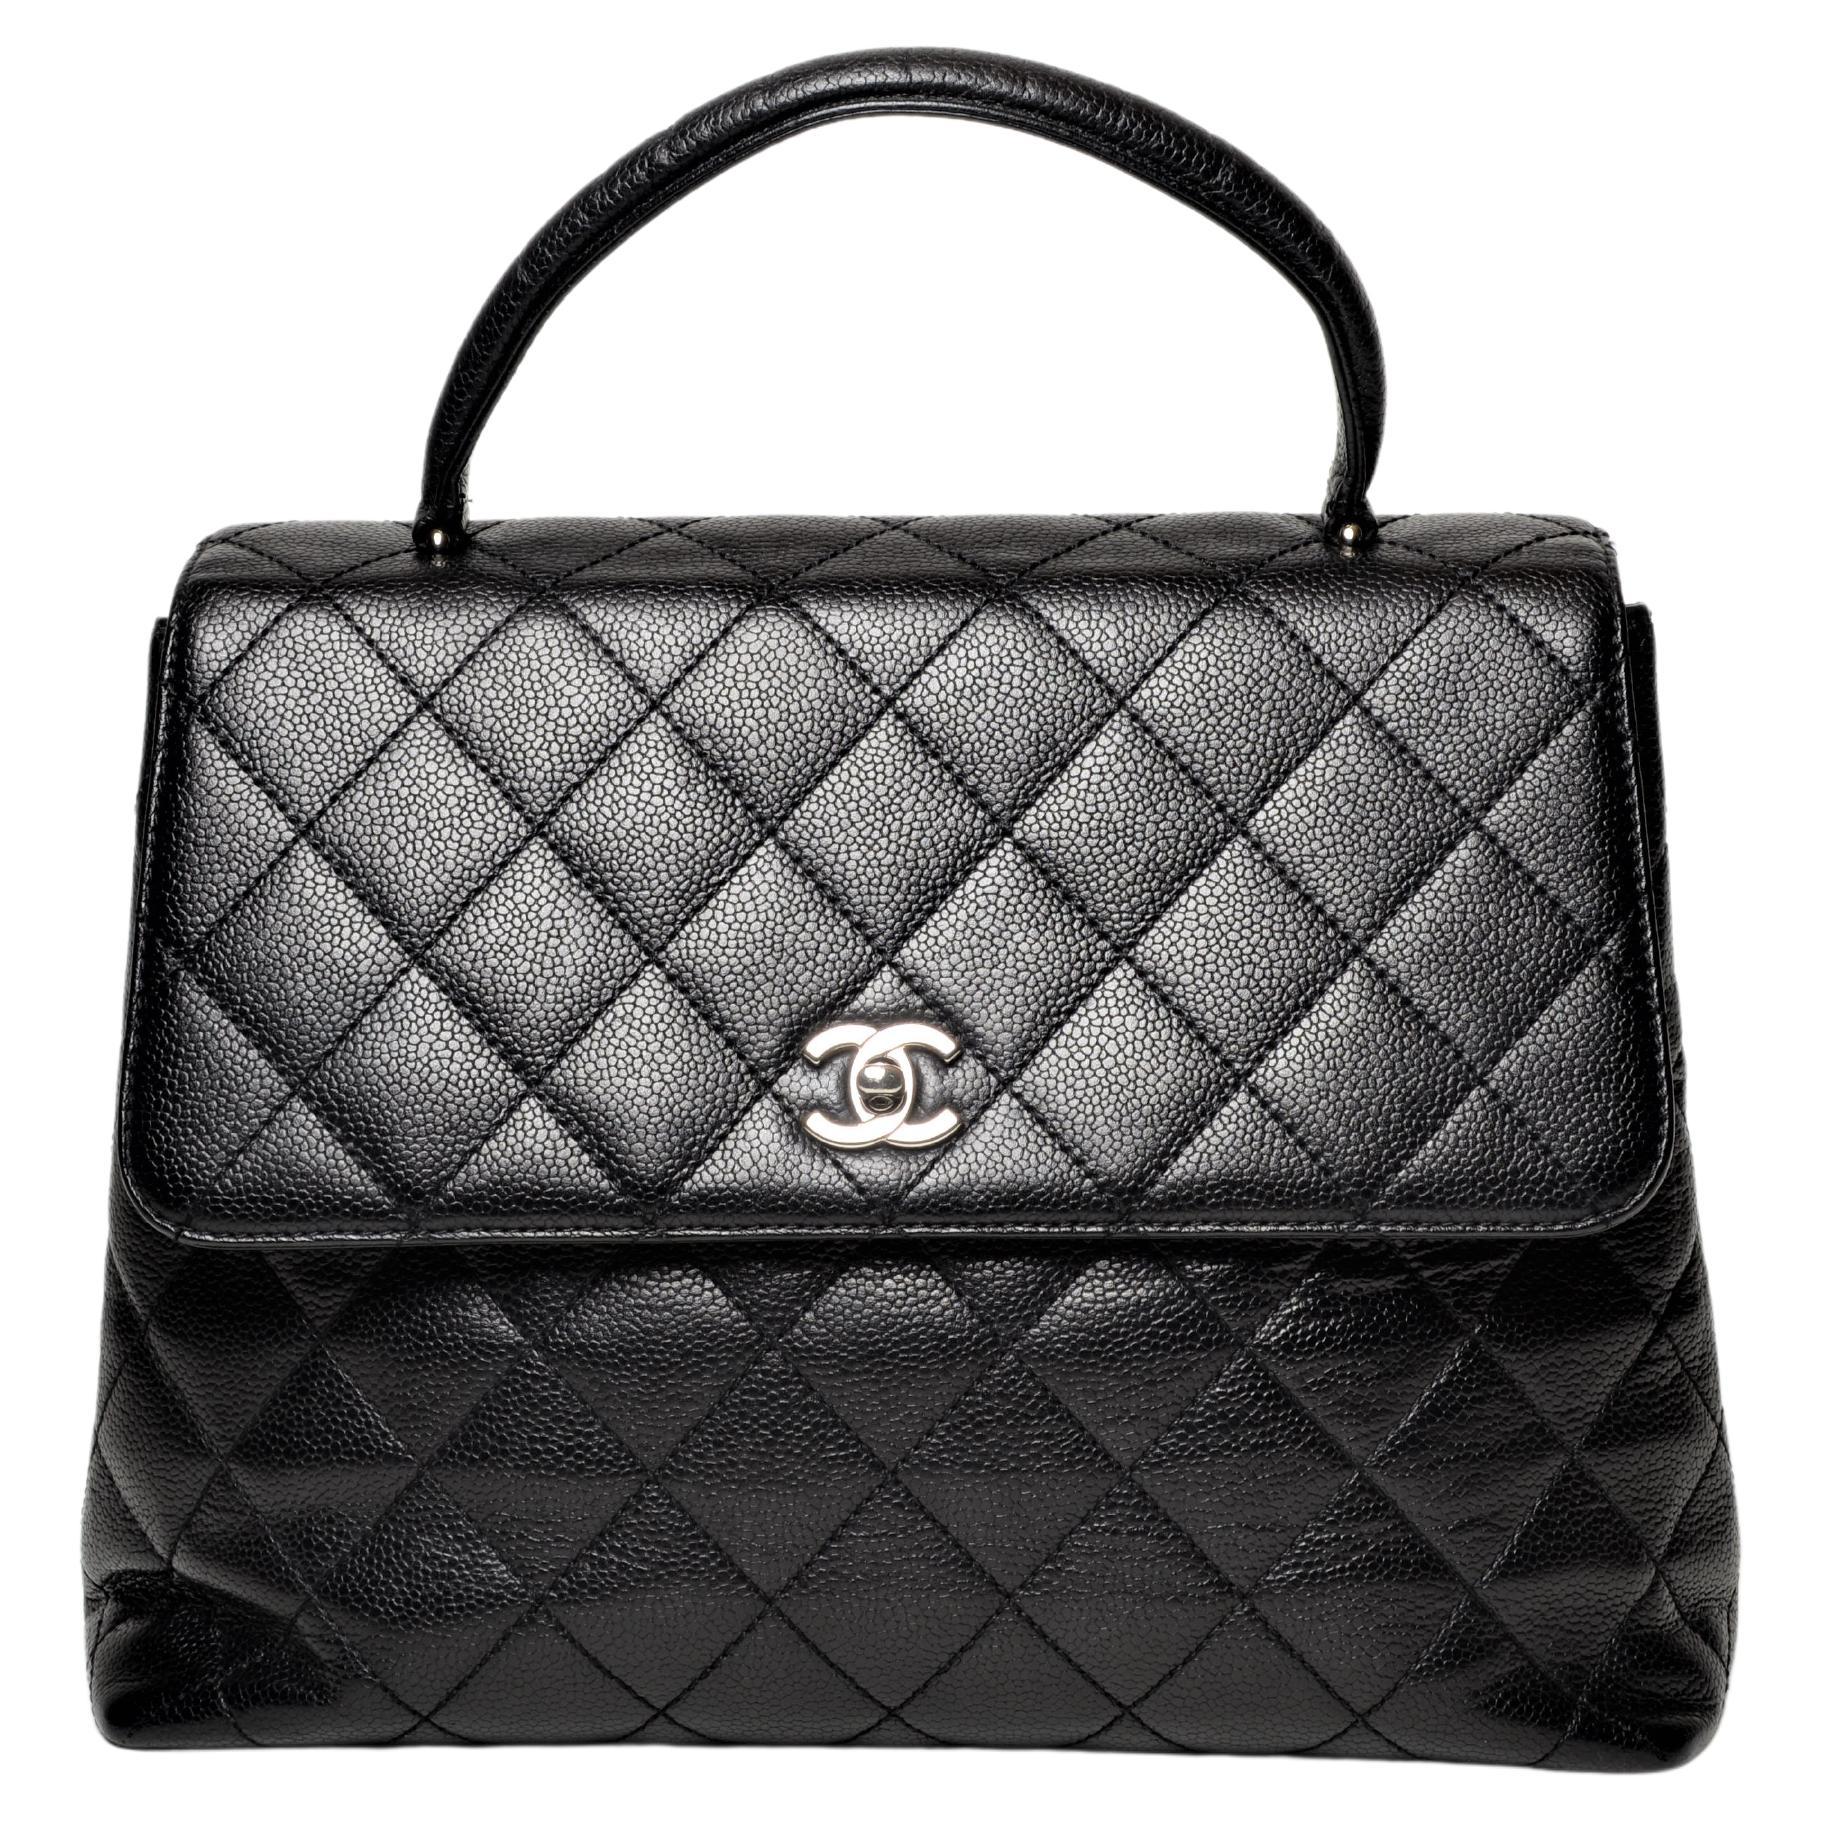 Chanel Kelly Black Caviar Leather Silver Hardware Top Handle Bag